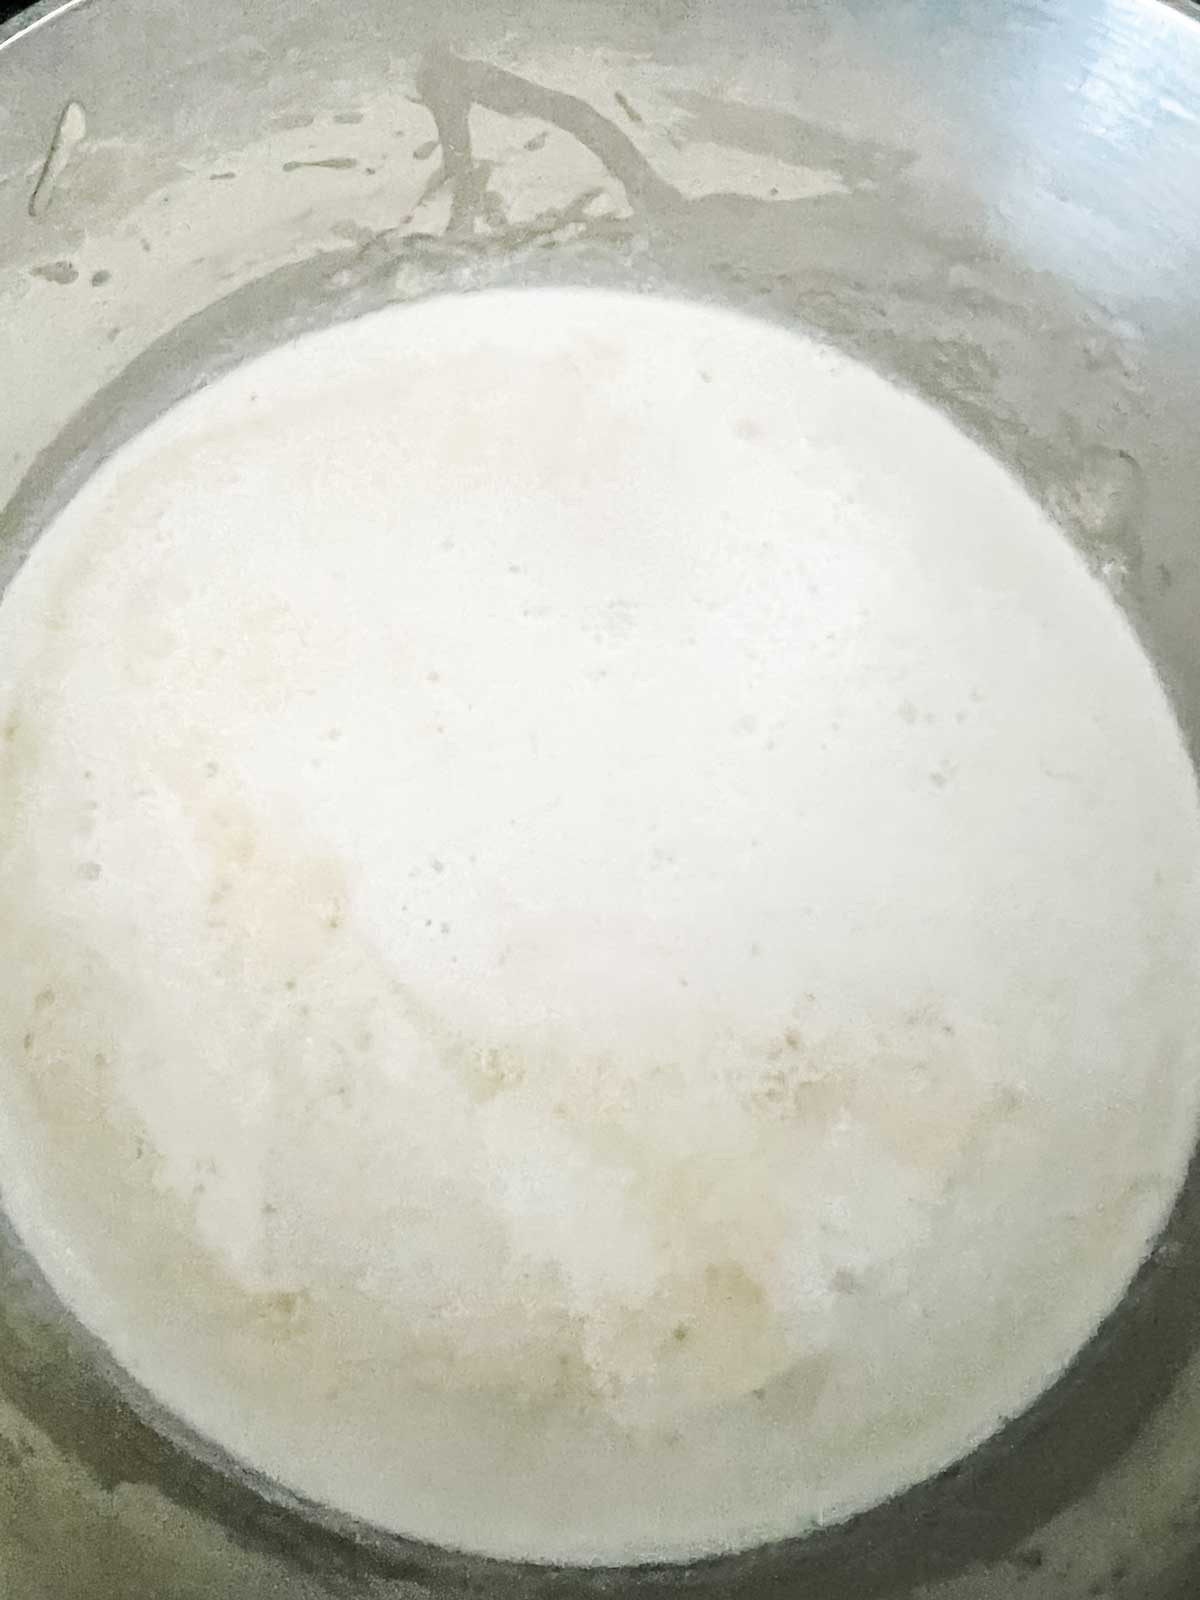 Photo of cream that has been added to a roux.